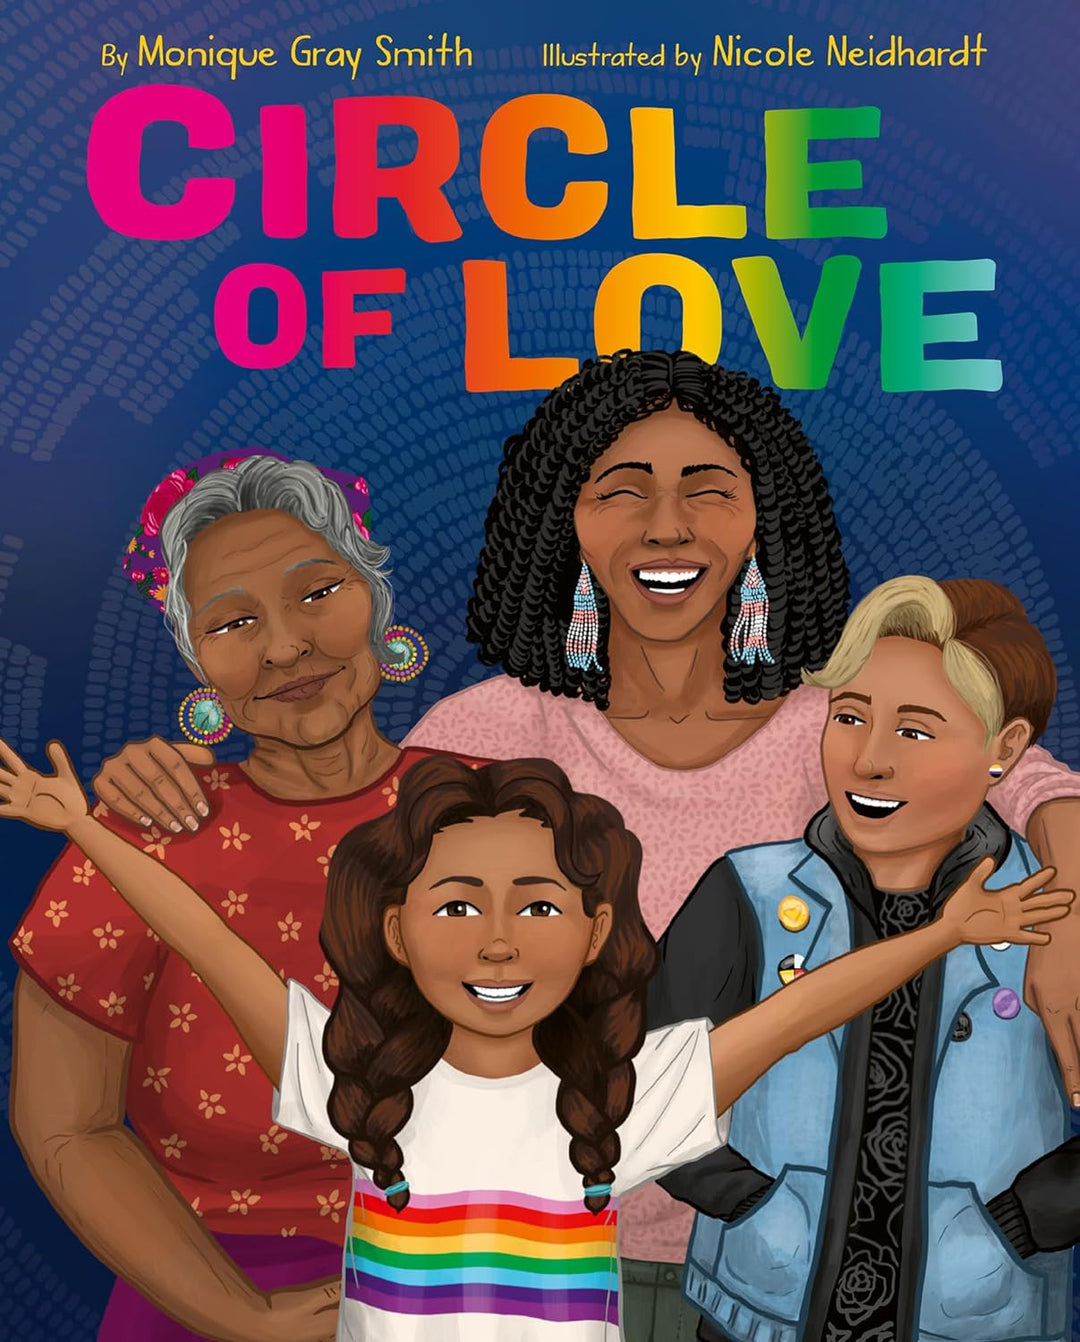 Circle of Love by Monique Gray Smith, illustrated by Nicole Neidhardt